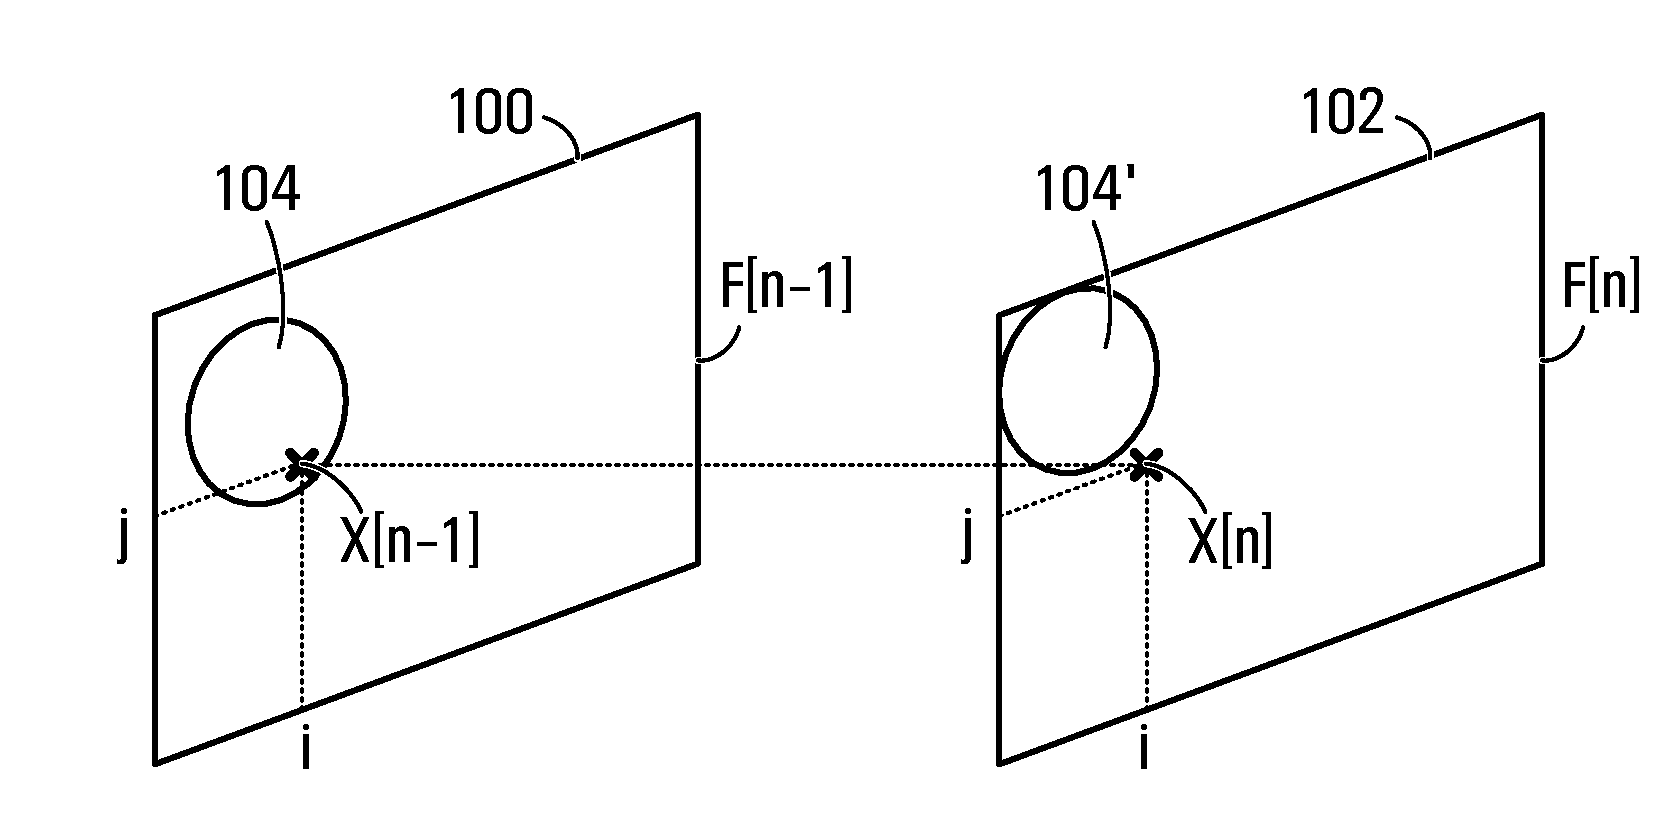 Protection filter for image and video processing